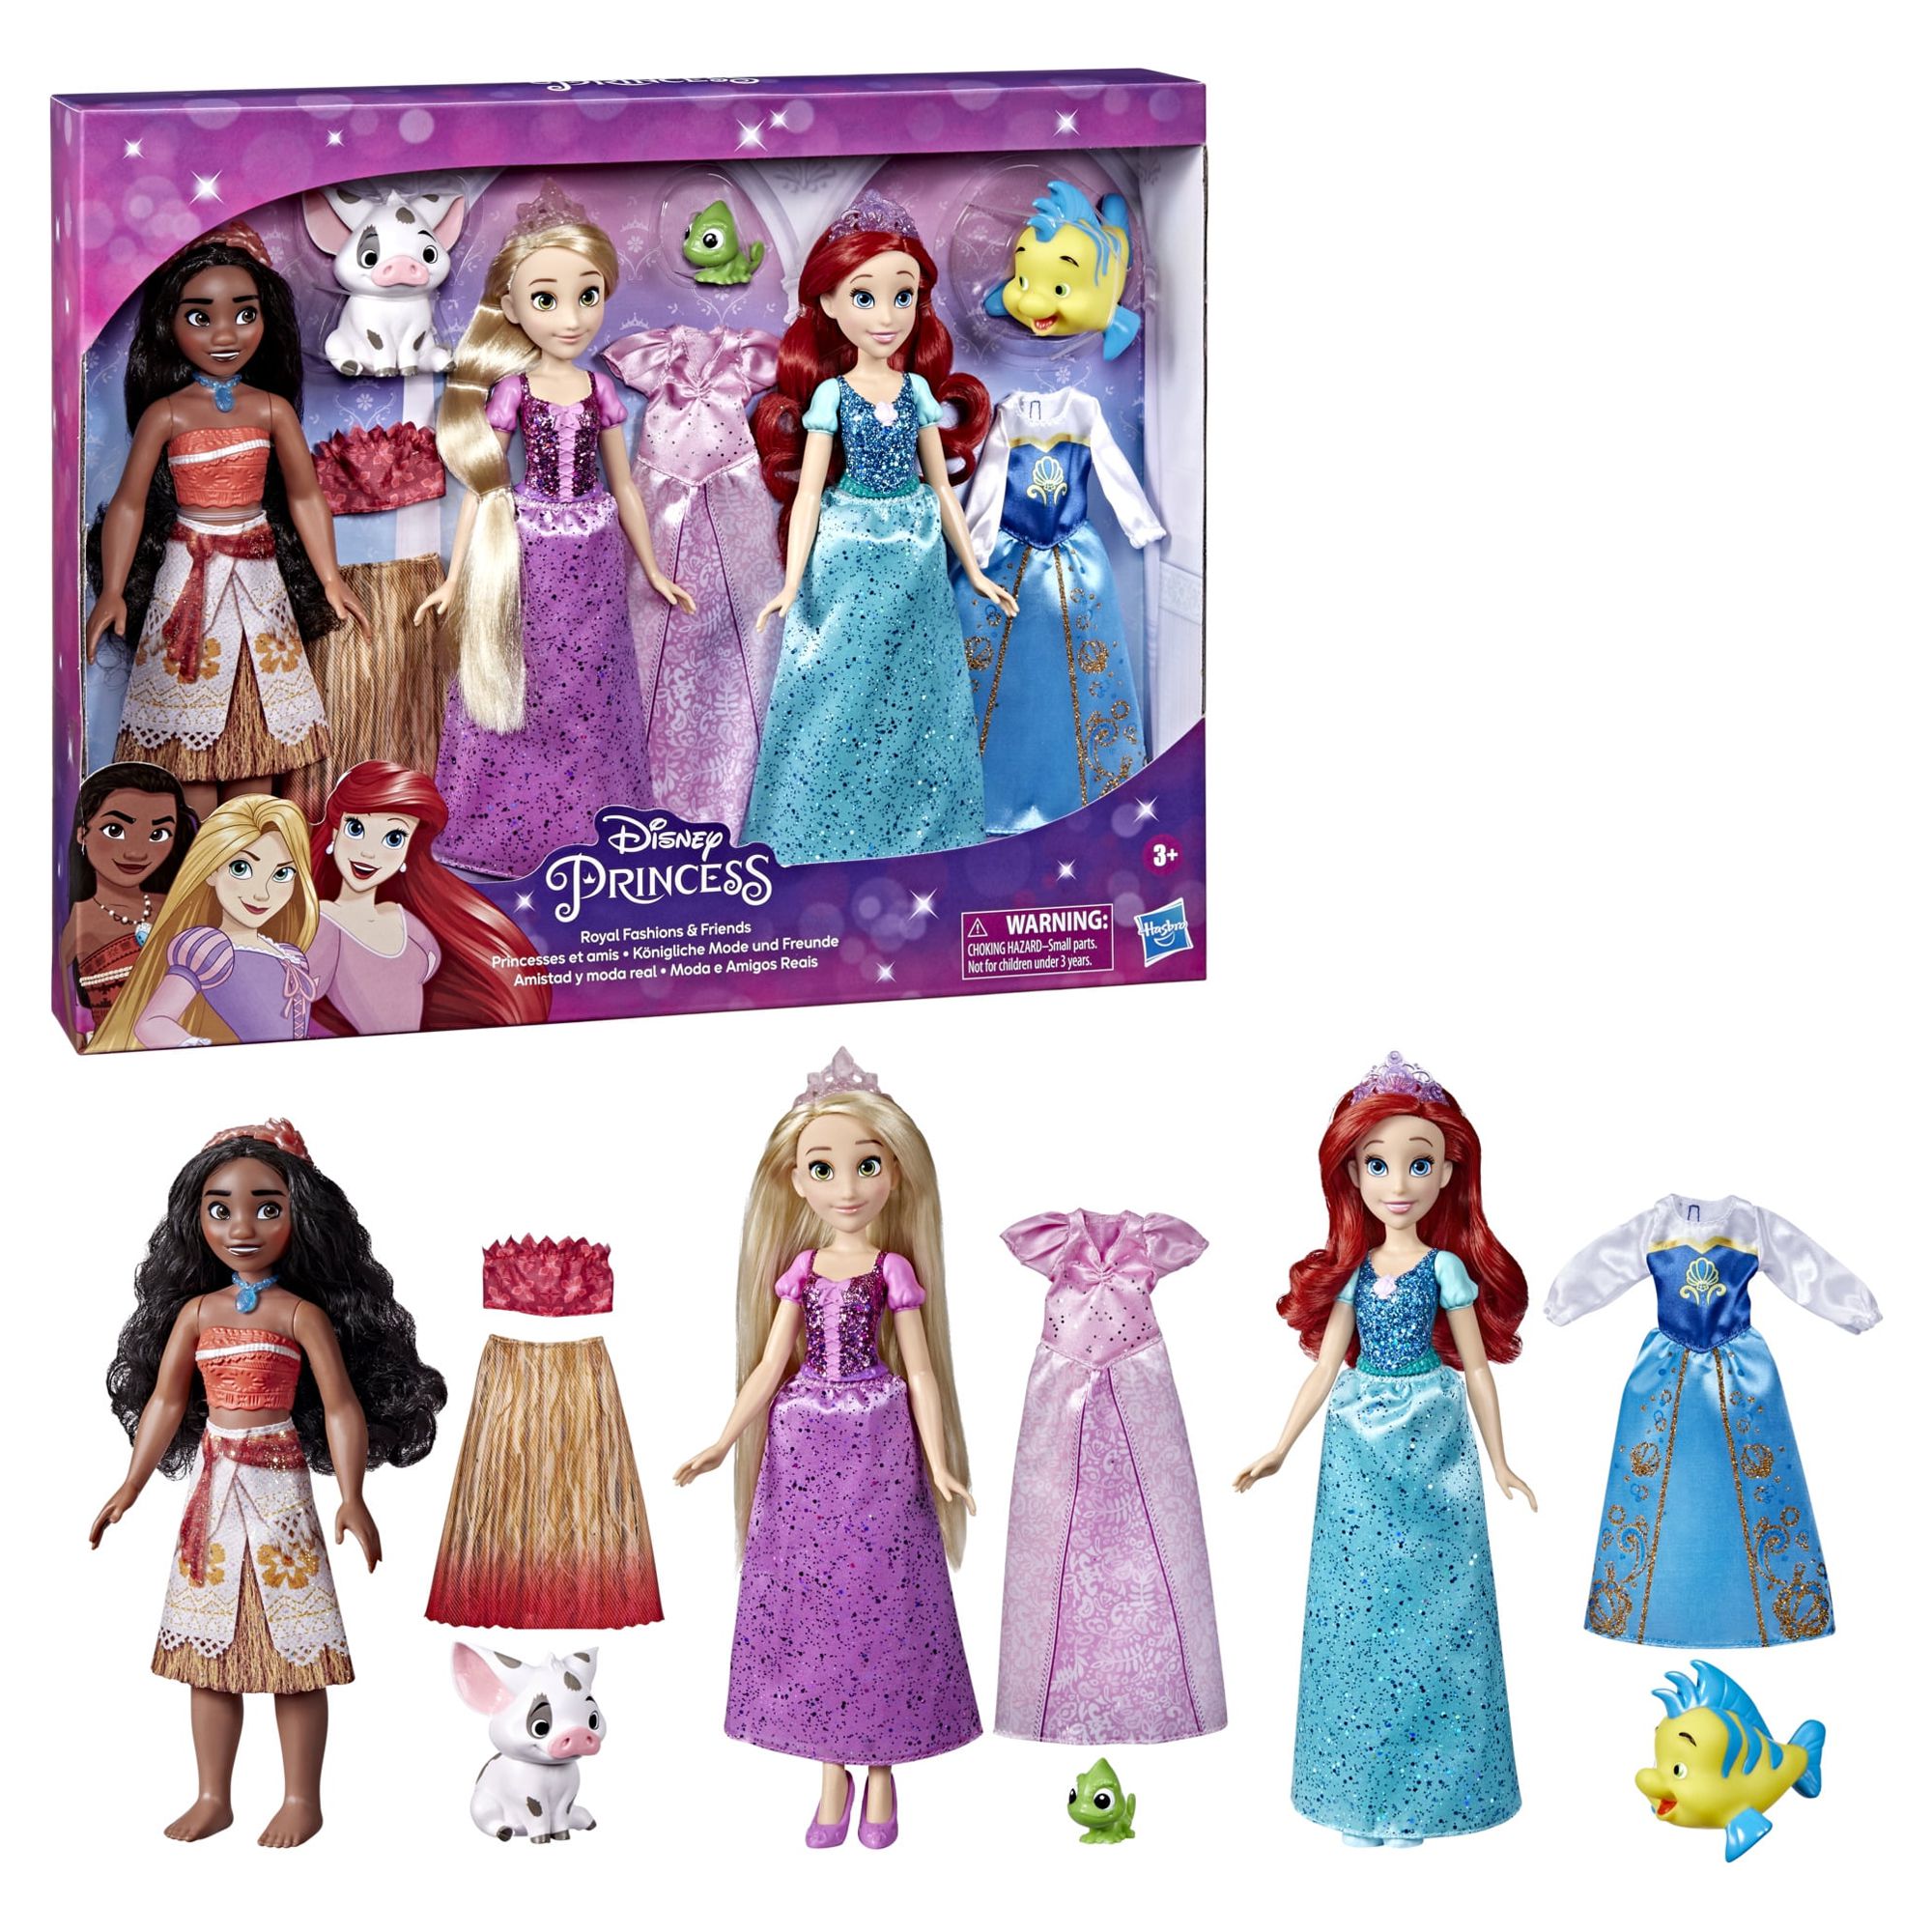 Disney Princess Royal Fashions and Friends 12 inch Fashion Doll, Ariel, Moana, and Rapunzel, Ages 4+ - image 3 of 5